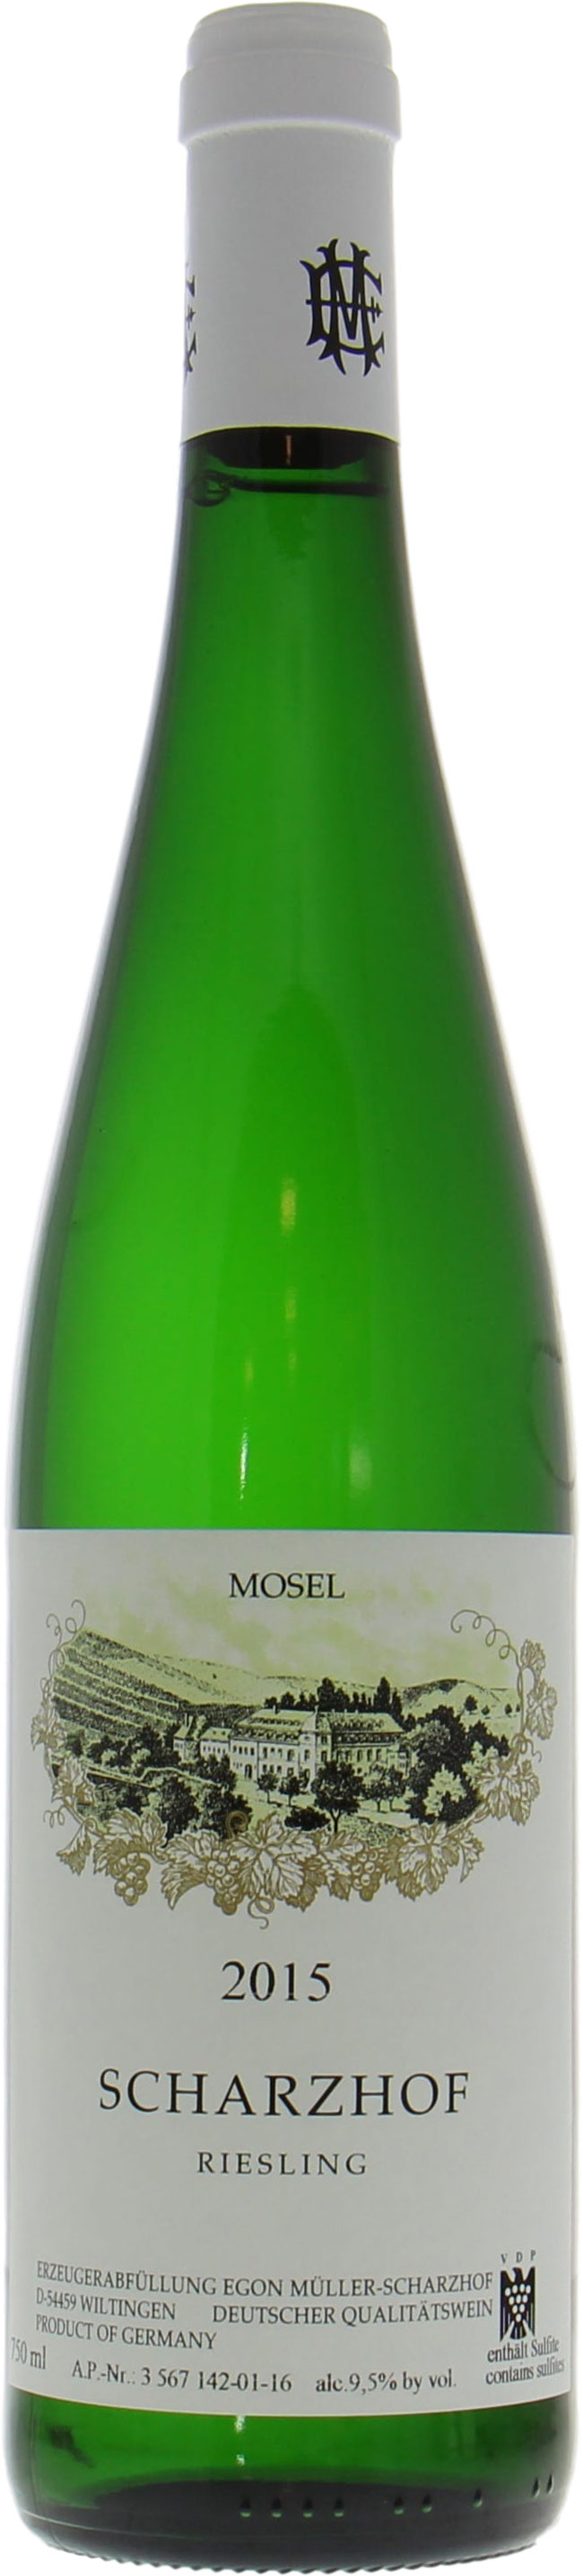 Egon Muller - Scharzhofberger Riesling QBA 2015 Perfect